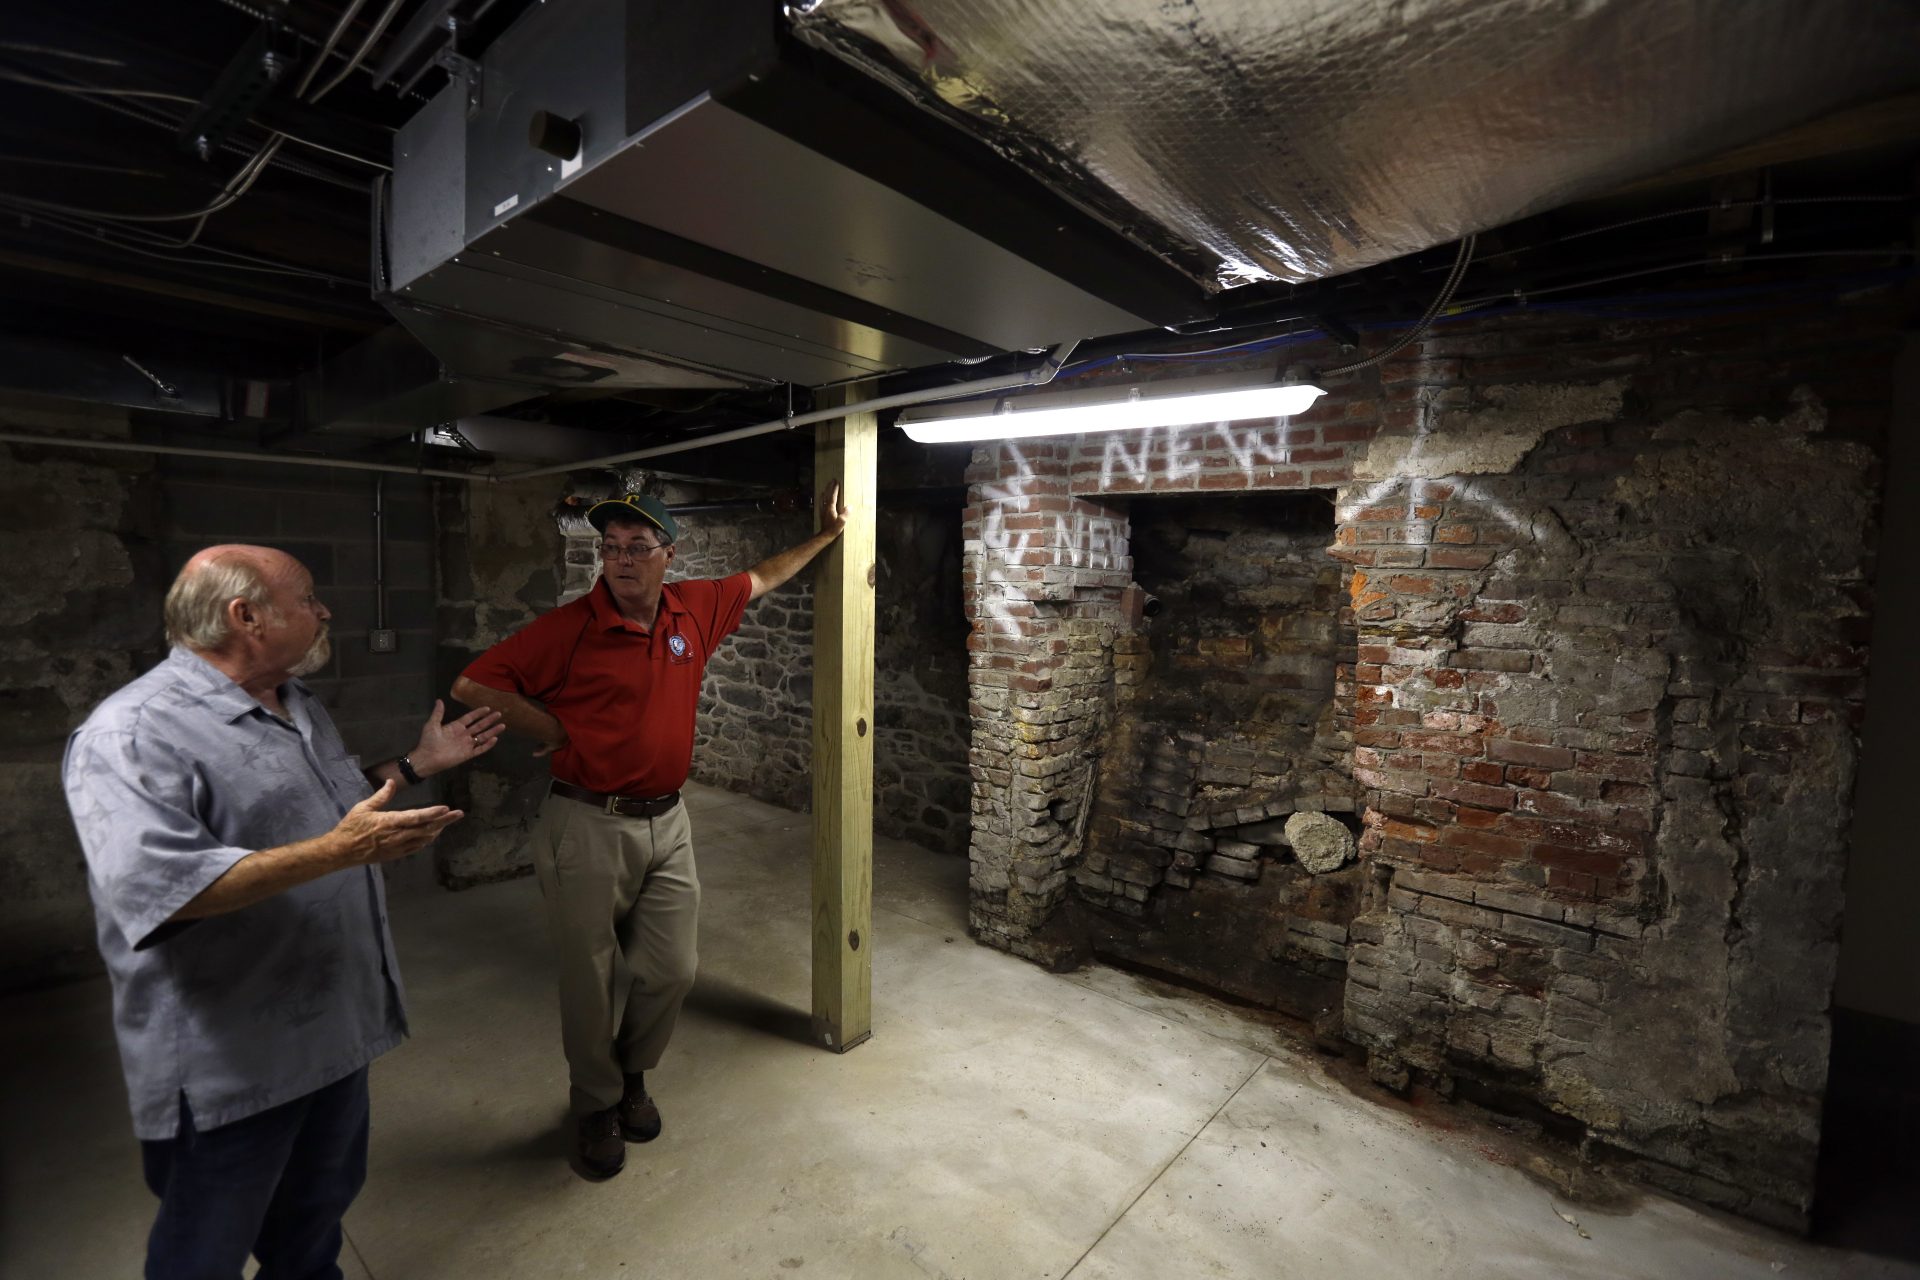 Tinicum's building official Herbert MacCombie, left, speaks with Tinicum township board president Patrick McCarthy in the lowest level of the refurbished Lazaretto Quarantine Station Wednesday July 10, 2019, in Essington, Pa. For Tinicum Township, renovating The Lazaretto was a way to embrace history and part of a broader plan to bring visitors to the community. For historians, saving the Lazaretto offers a chance to tell the story of immigration, epidemics and public health in America's early days. Built in 1799, the quarantine station protected the Port of Philadelphia against the introduction of epidemic disease for nearly a century.